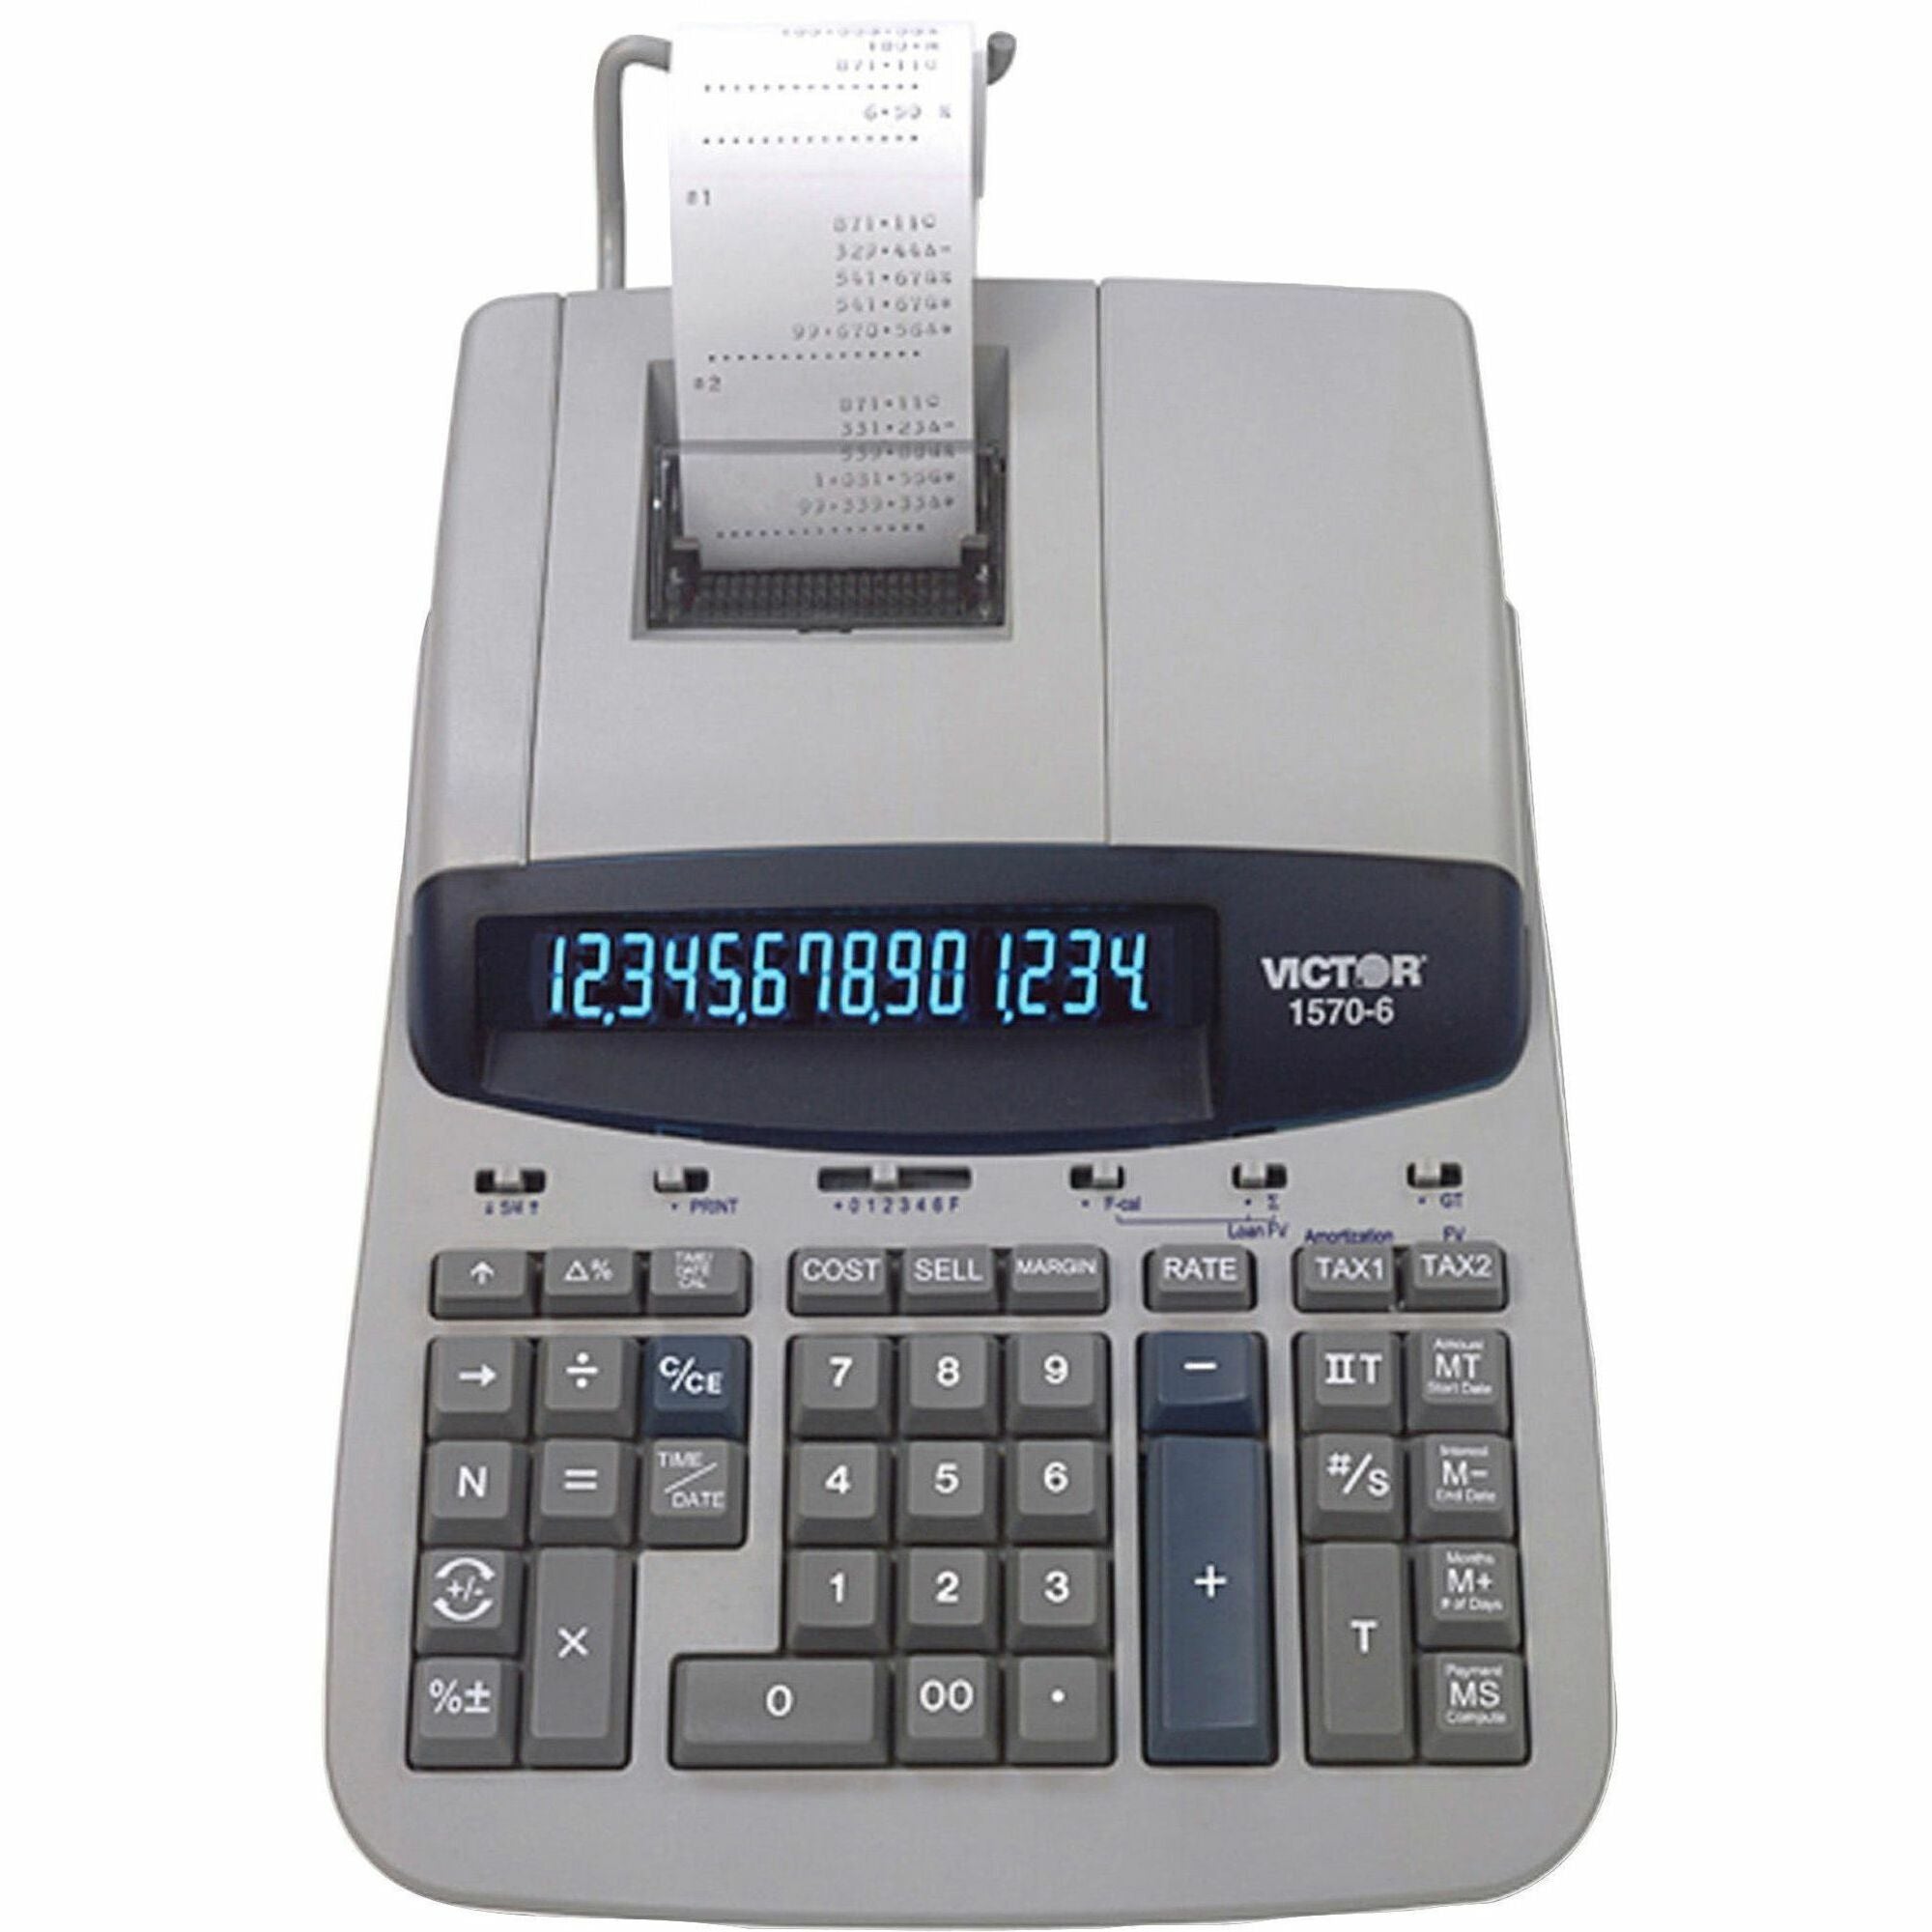 Victor 1570-6 14 Digit Professional Grade Heavy Duty Commercial Printing Calculator - 5.2 LPS - Clock, Date, Big Display, Independent Memory, 4-Key Memory, Sign Change - Power Adapter Powered - 2.8" x 8.8" x 12.5" - Gray, Off White - 1 Each - 